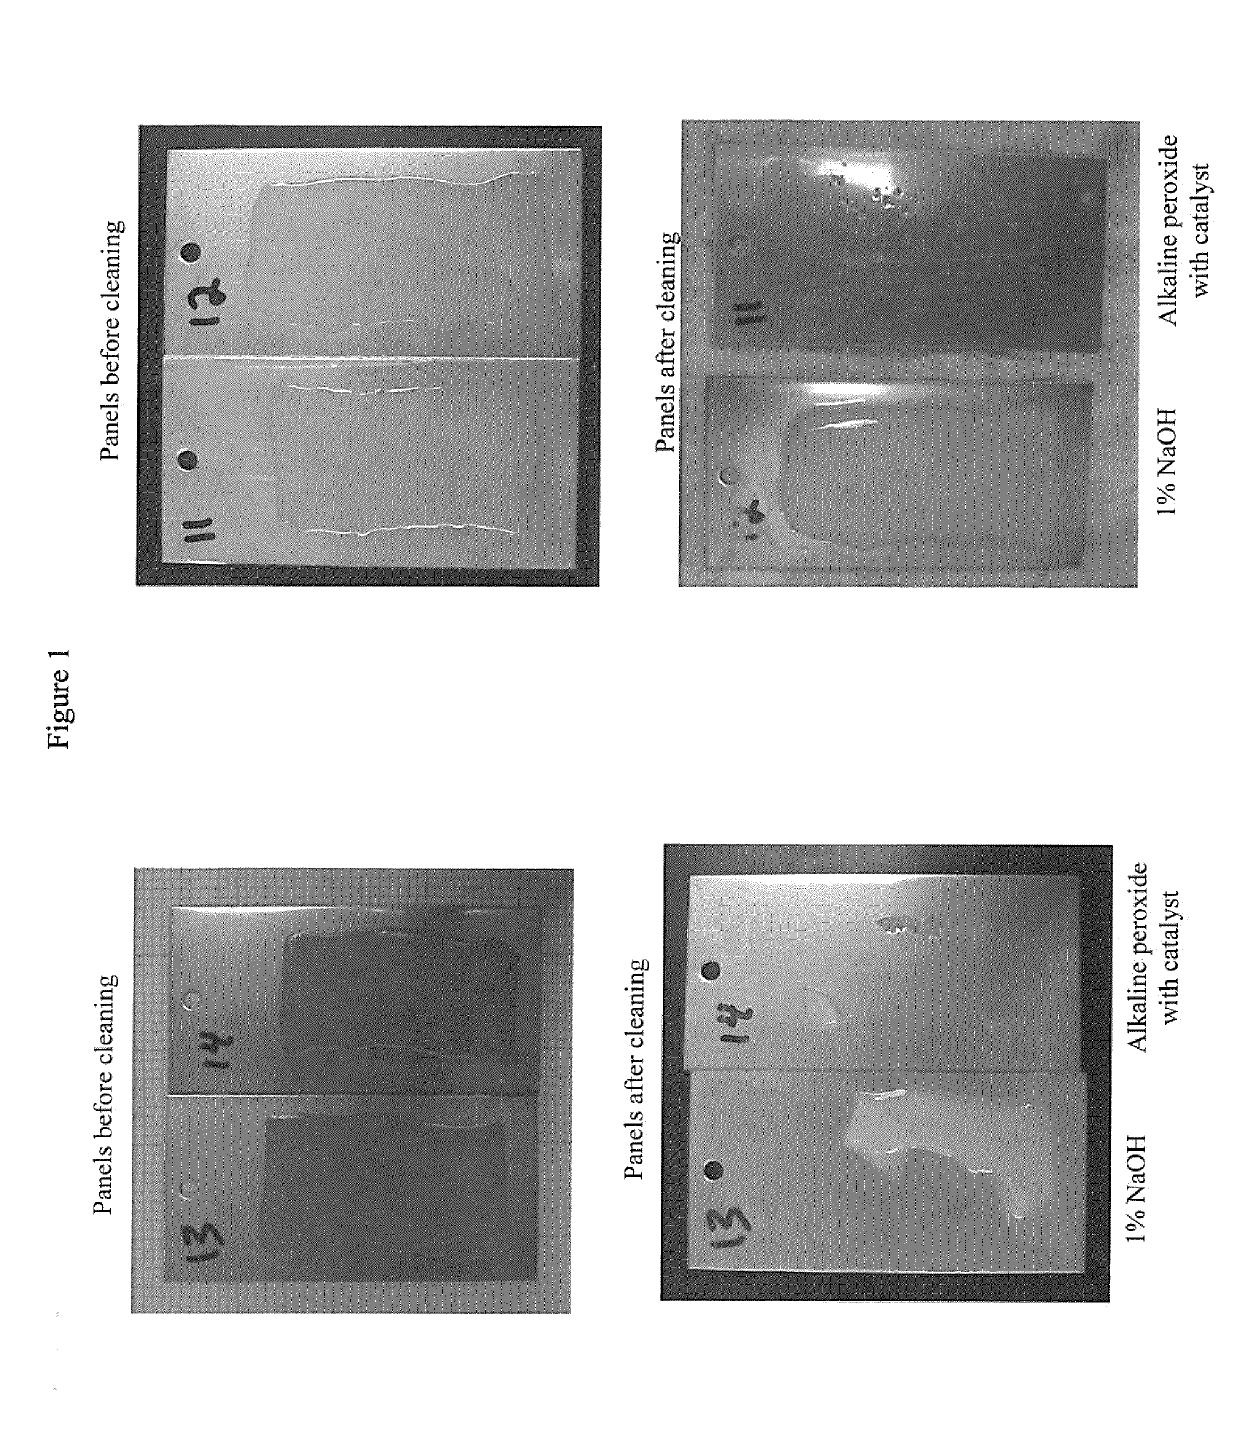 Use of activator complexes to enhance lower temperature cleaning in alkaline peroxide cleaning systems